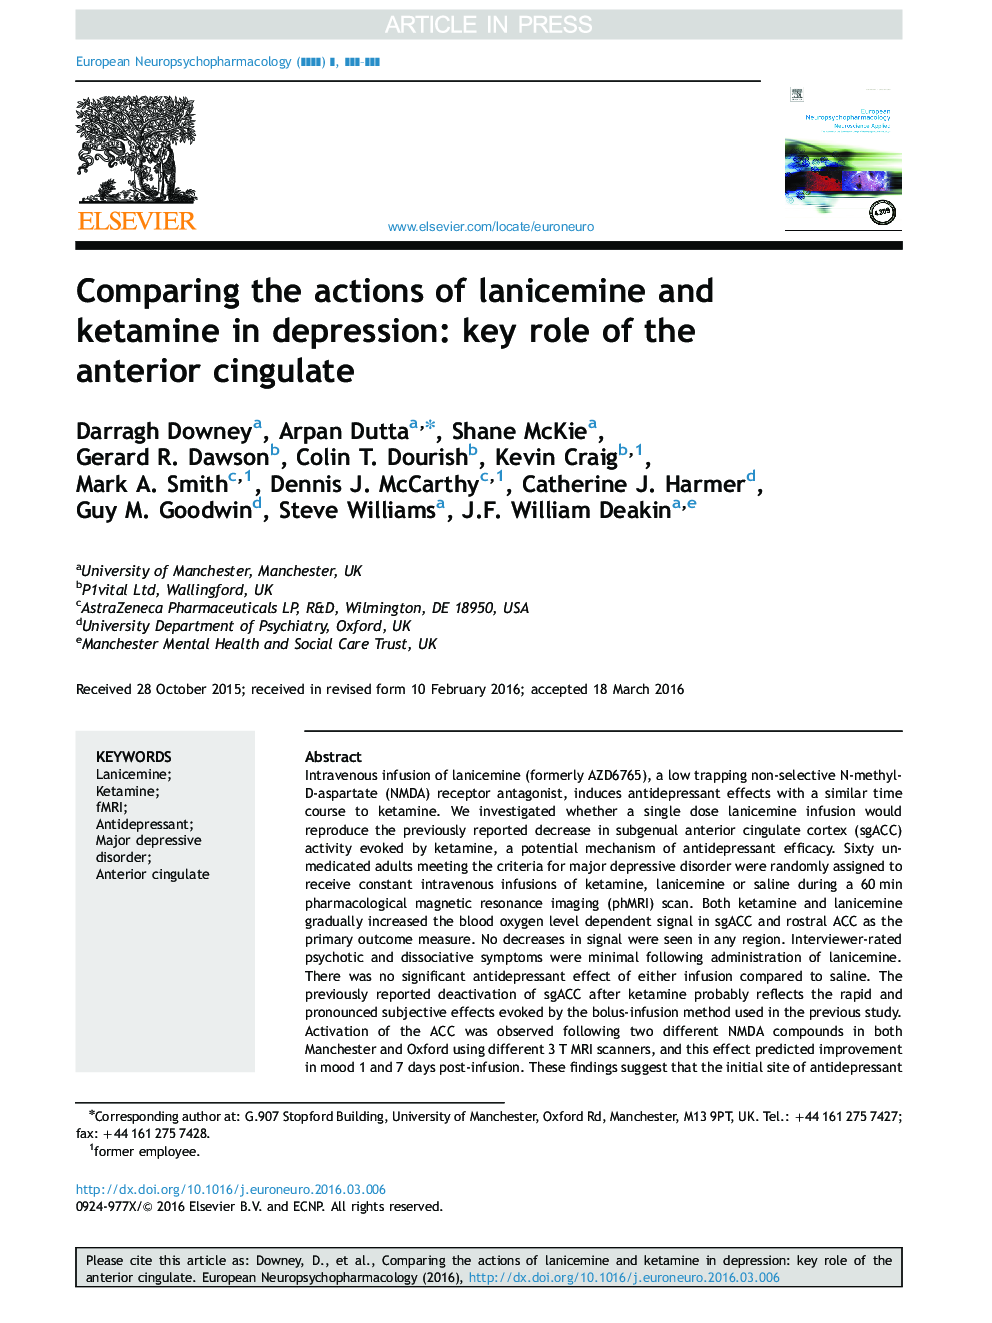 Comparing the actions of lanicemine and ketamine in depression: key role of the anterior cingulate